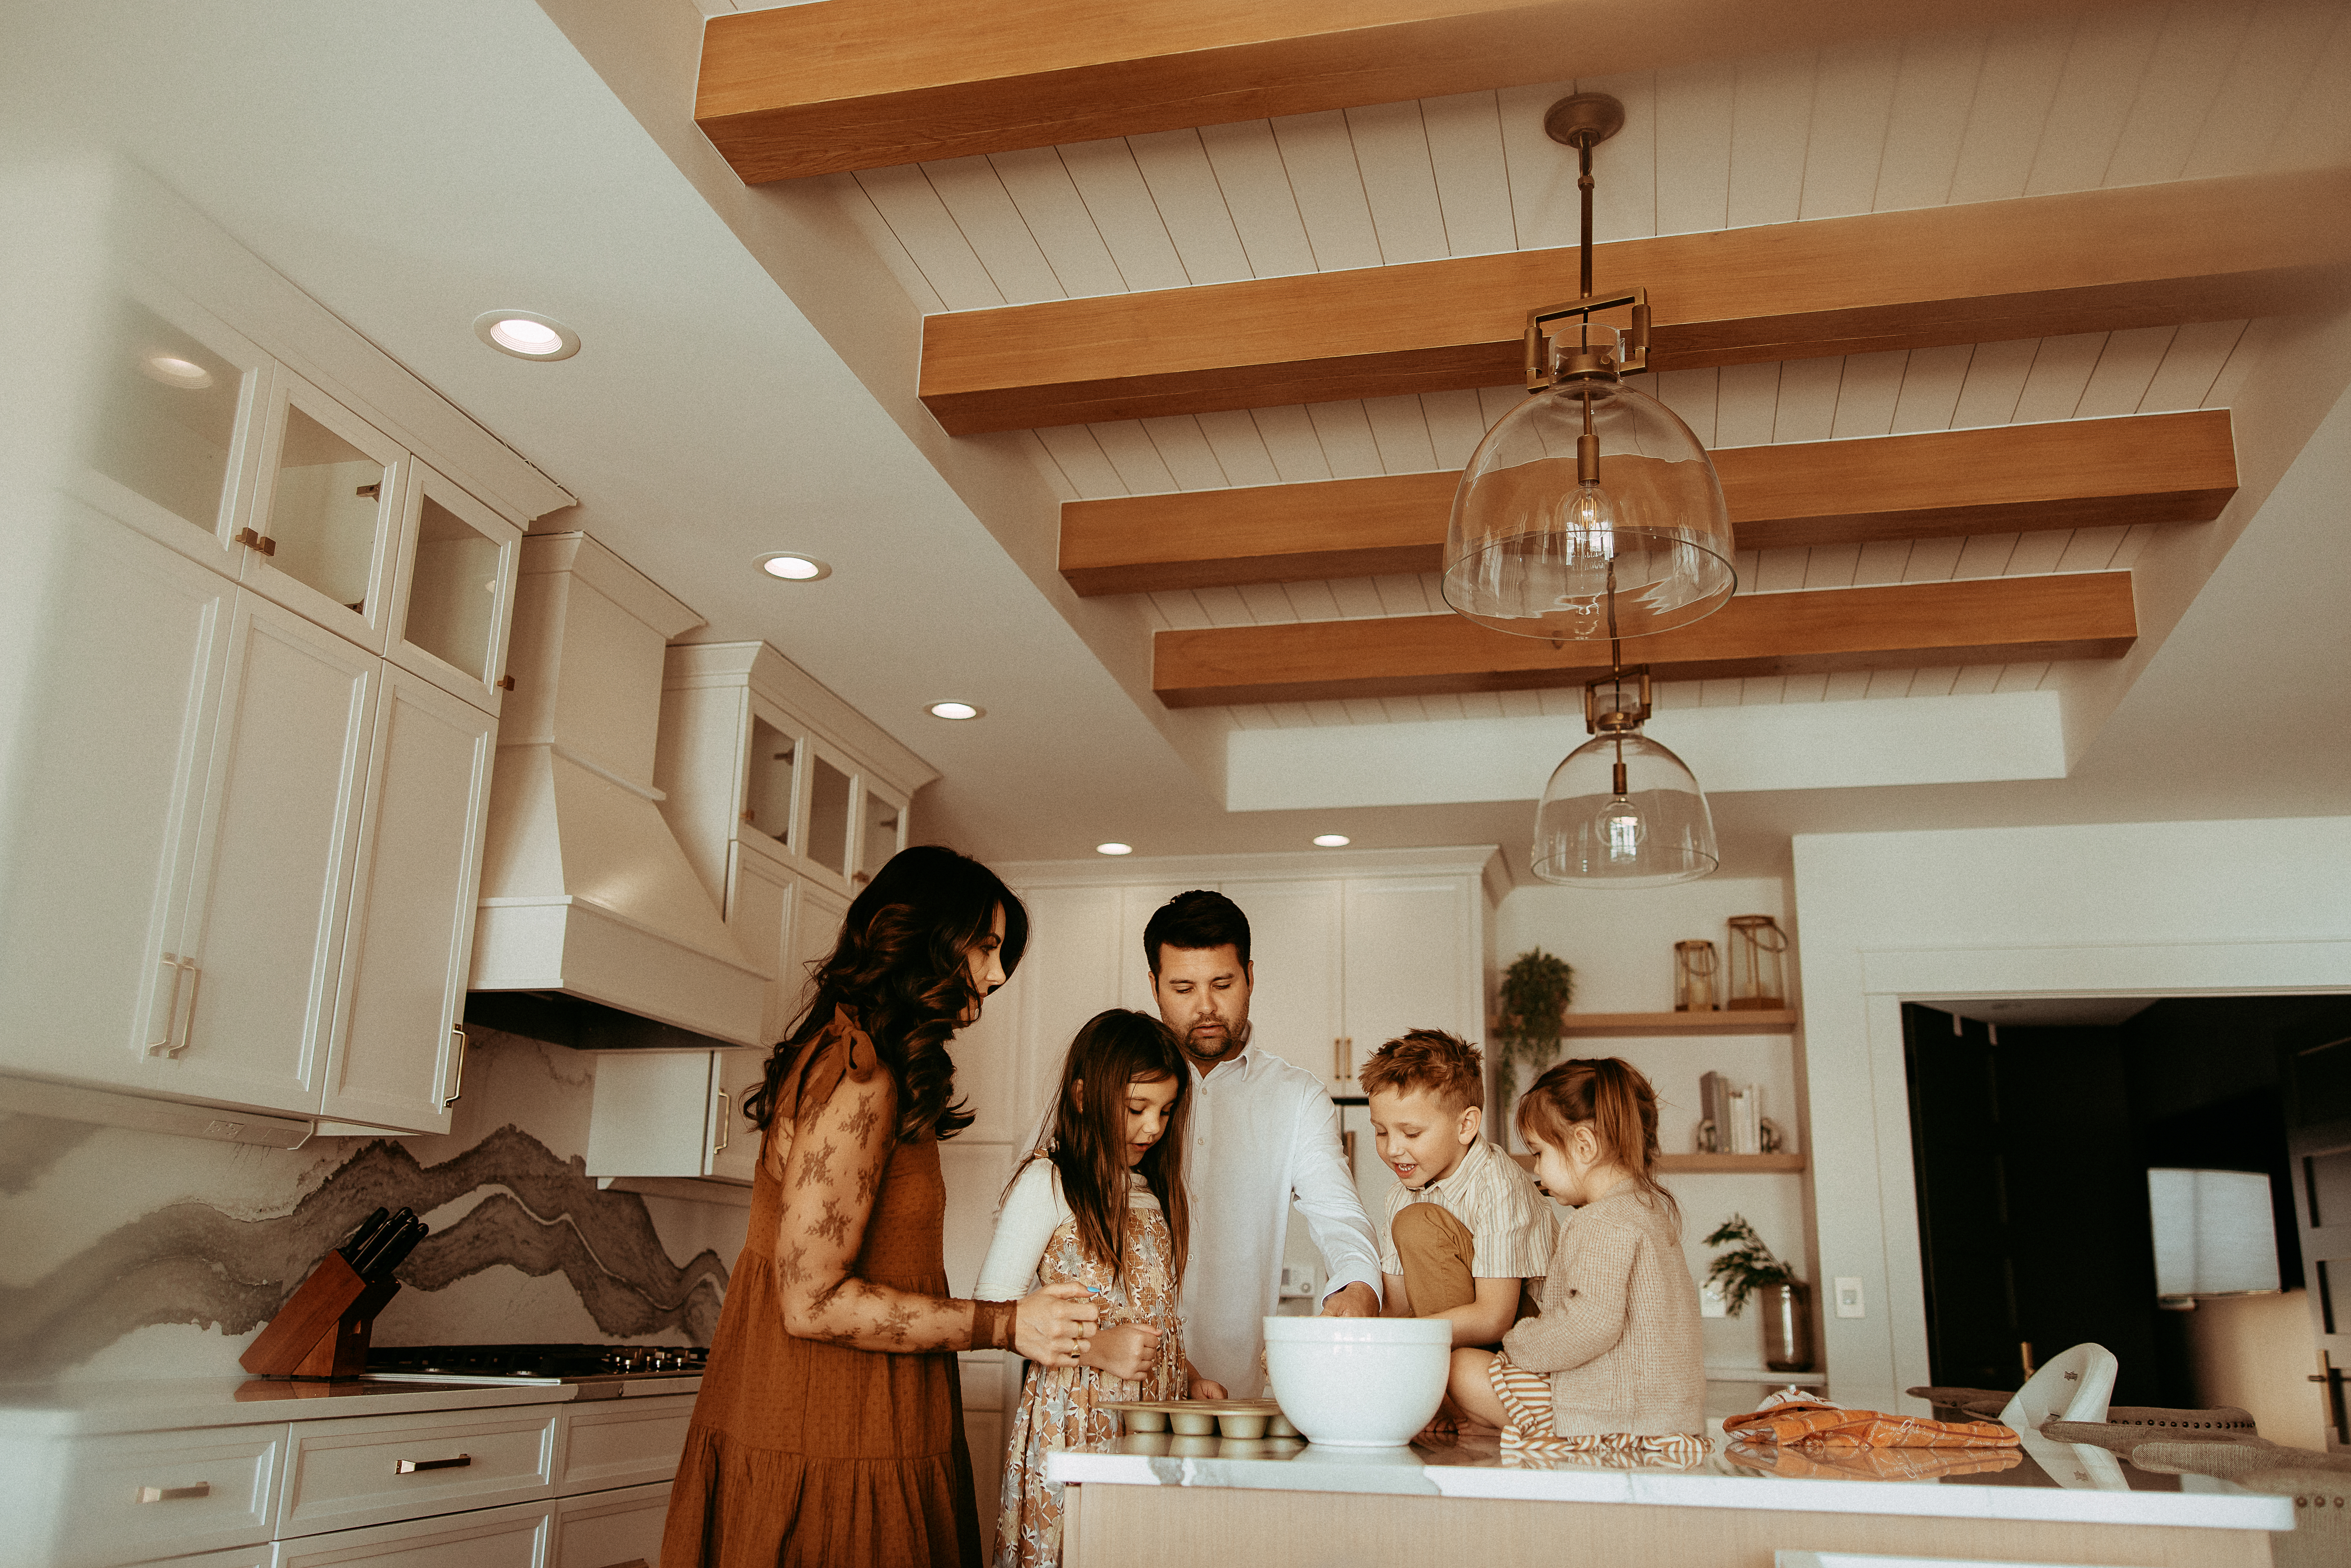 Family gathered around kitchen countertop mixing muffins together at an in-home family photography session.